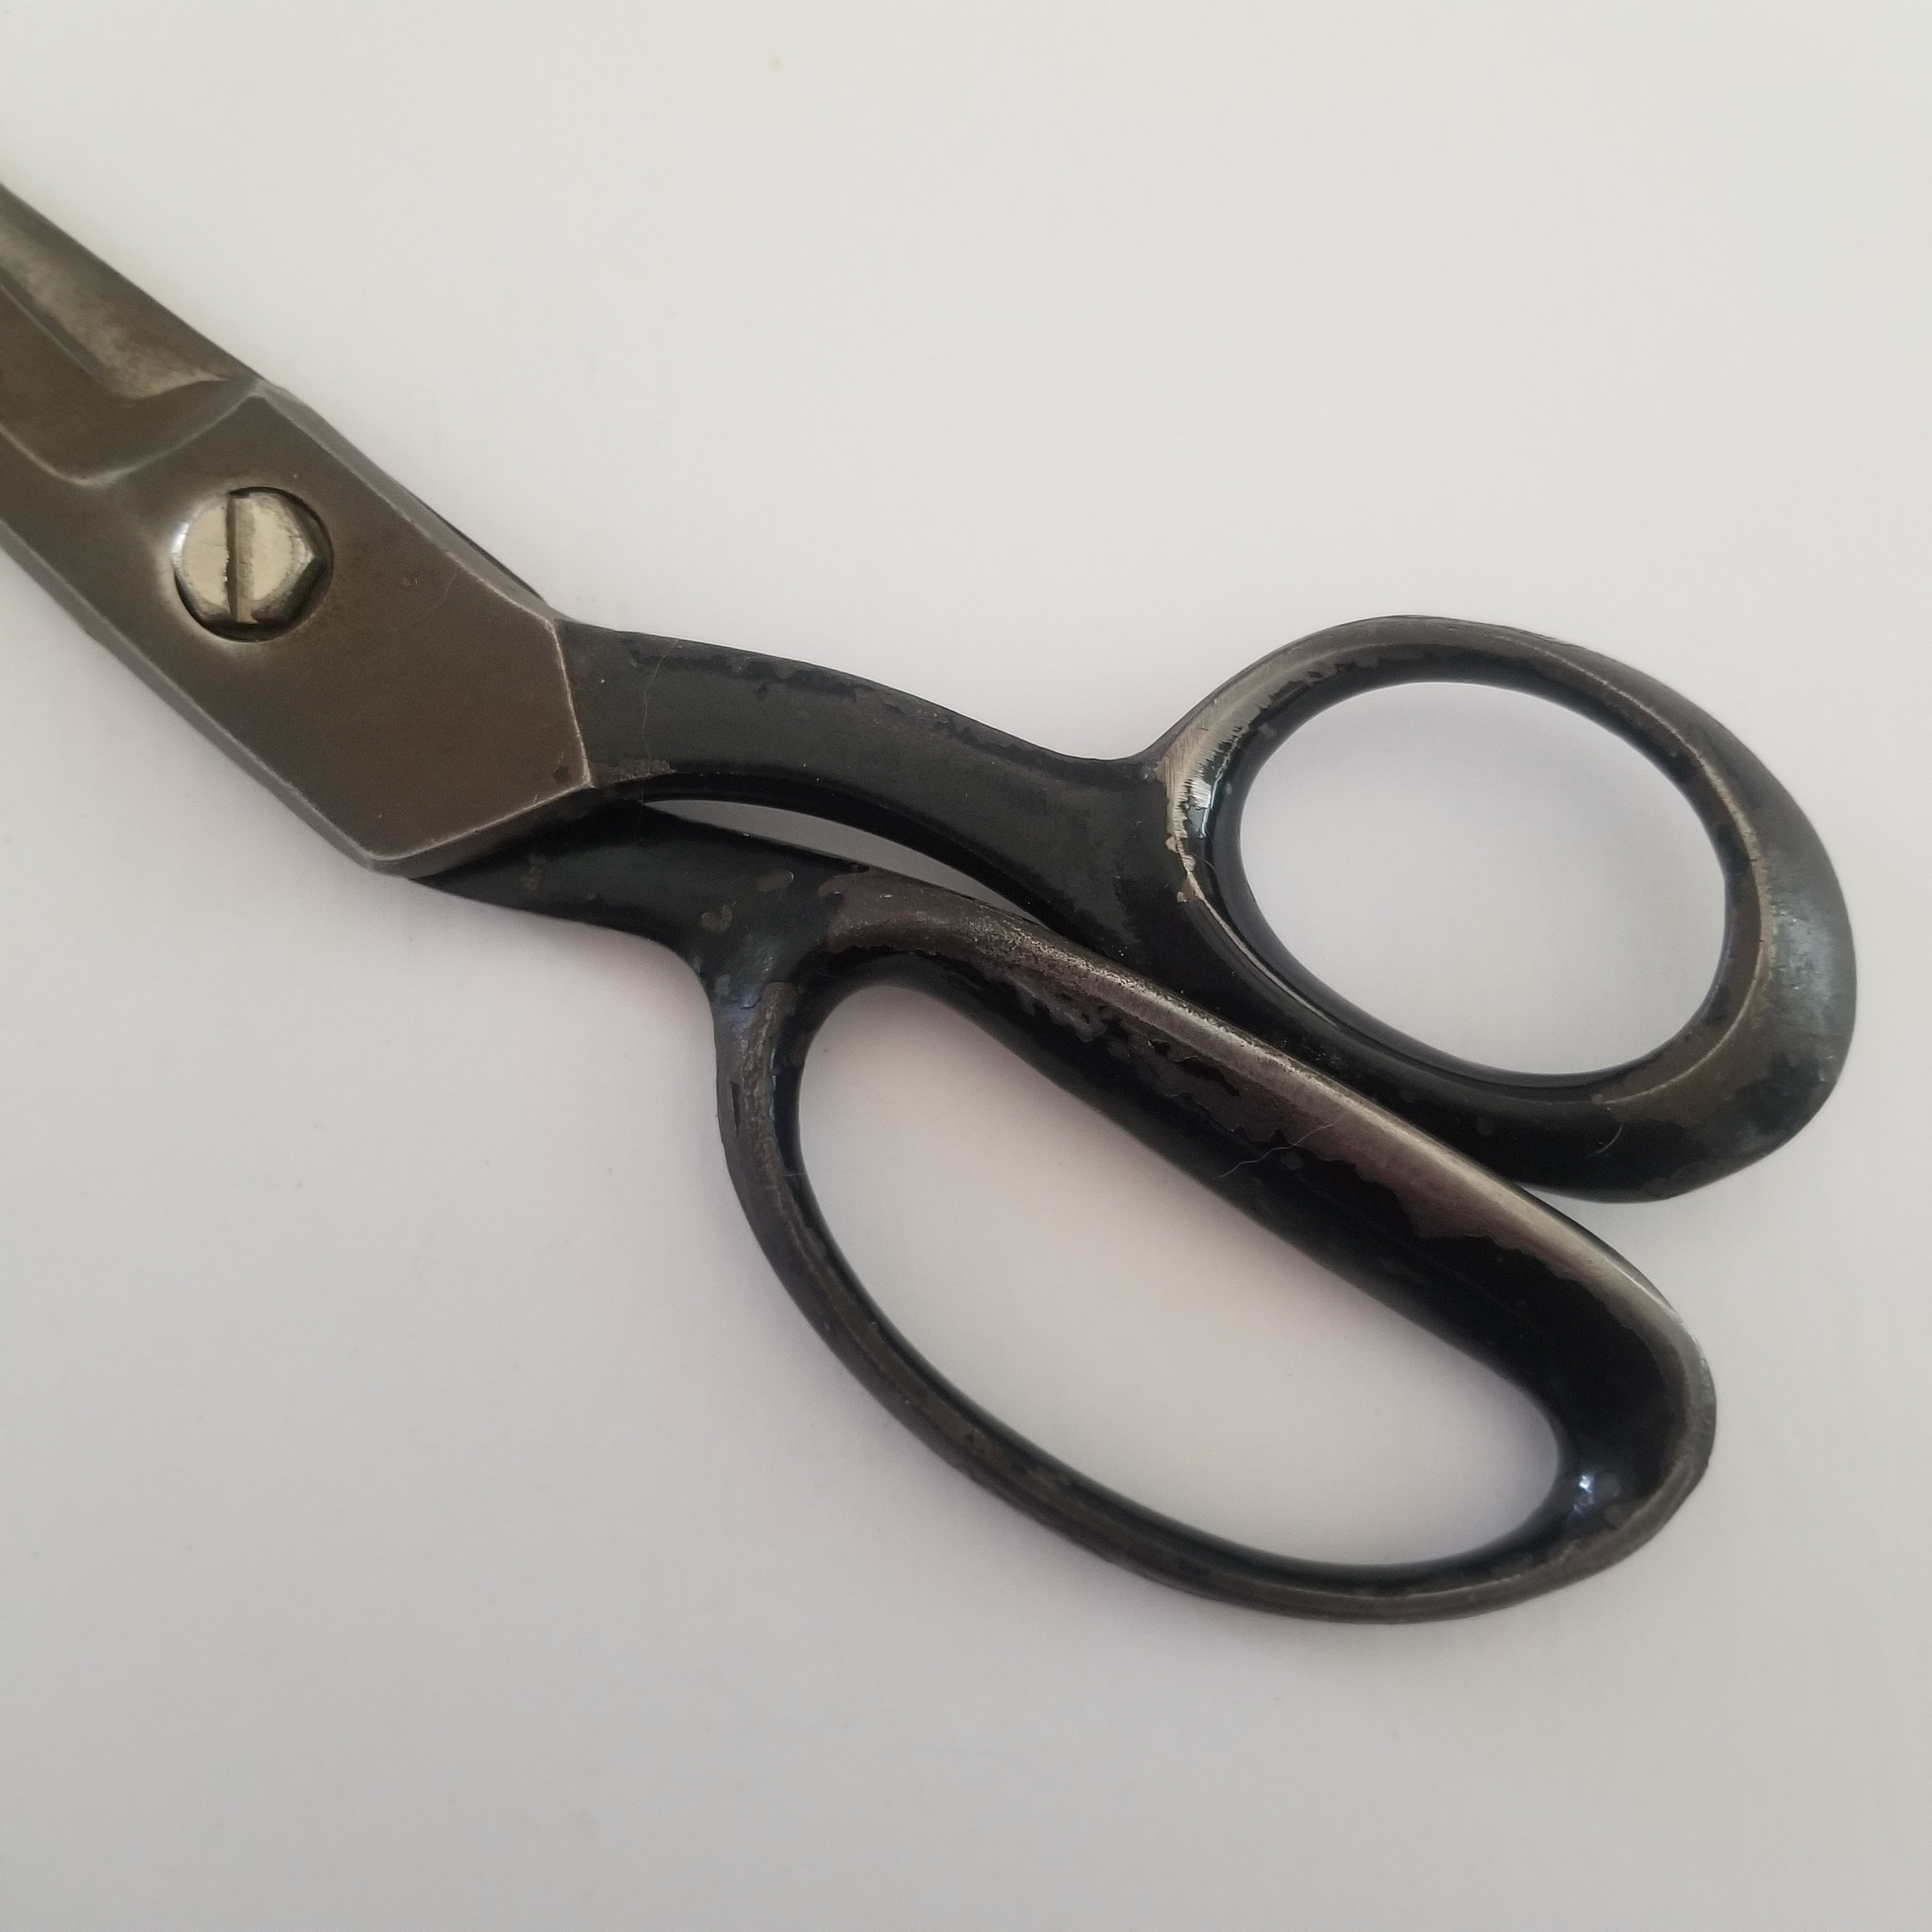 Wiss Sewing and Embroidery Scissors #764